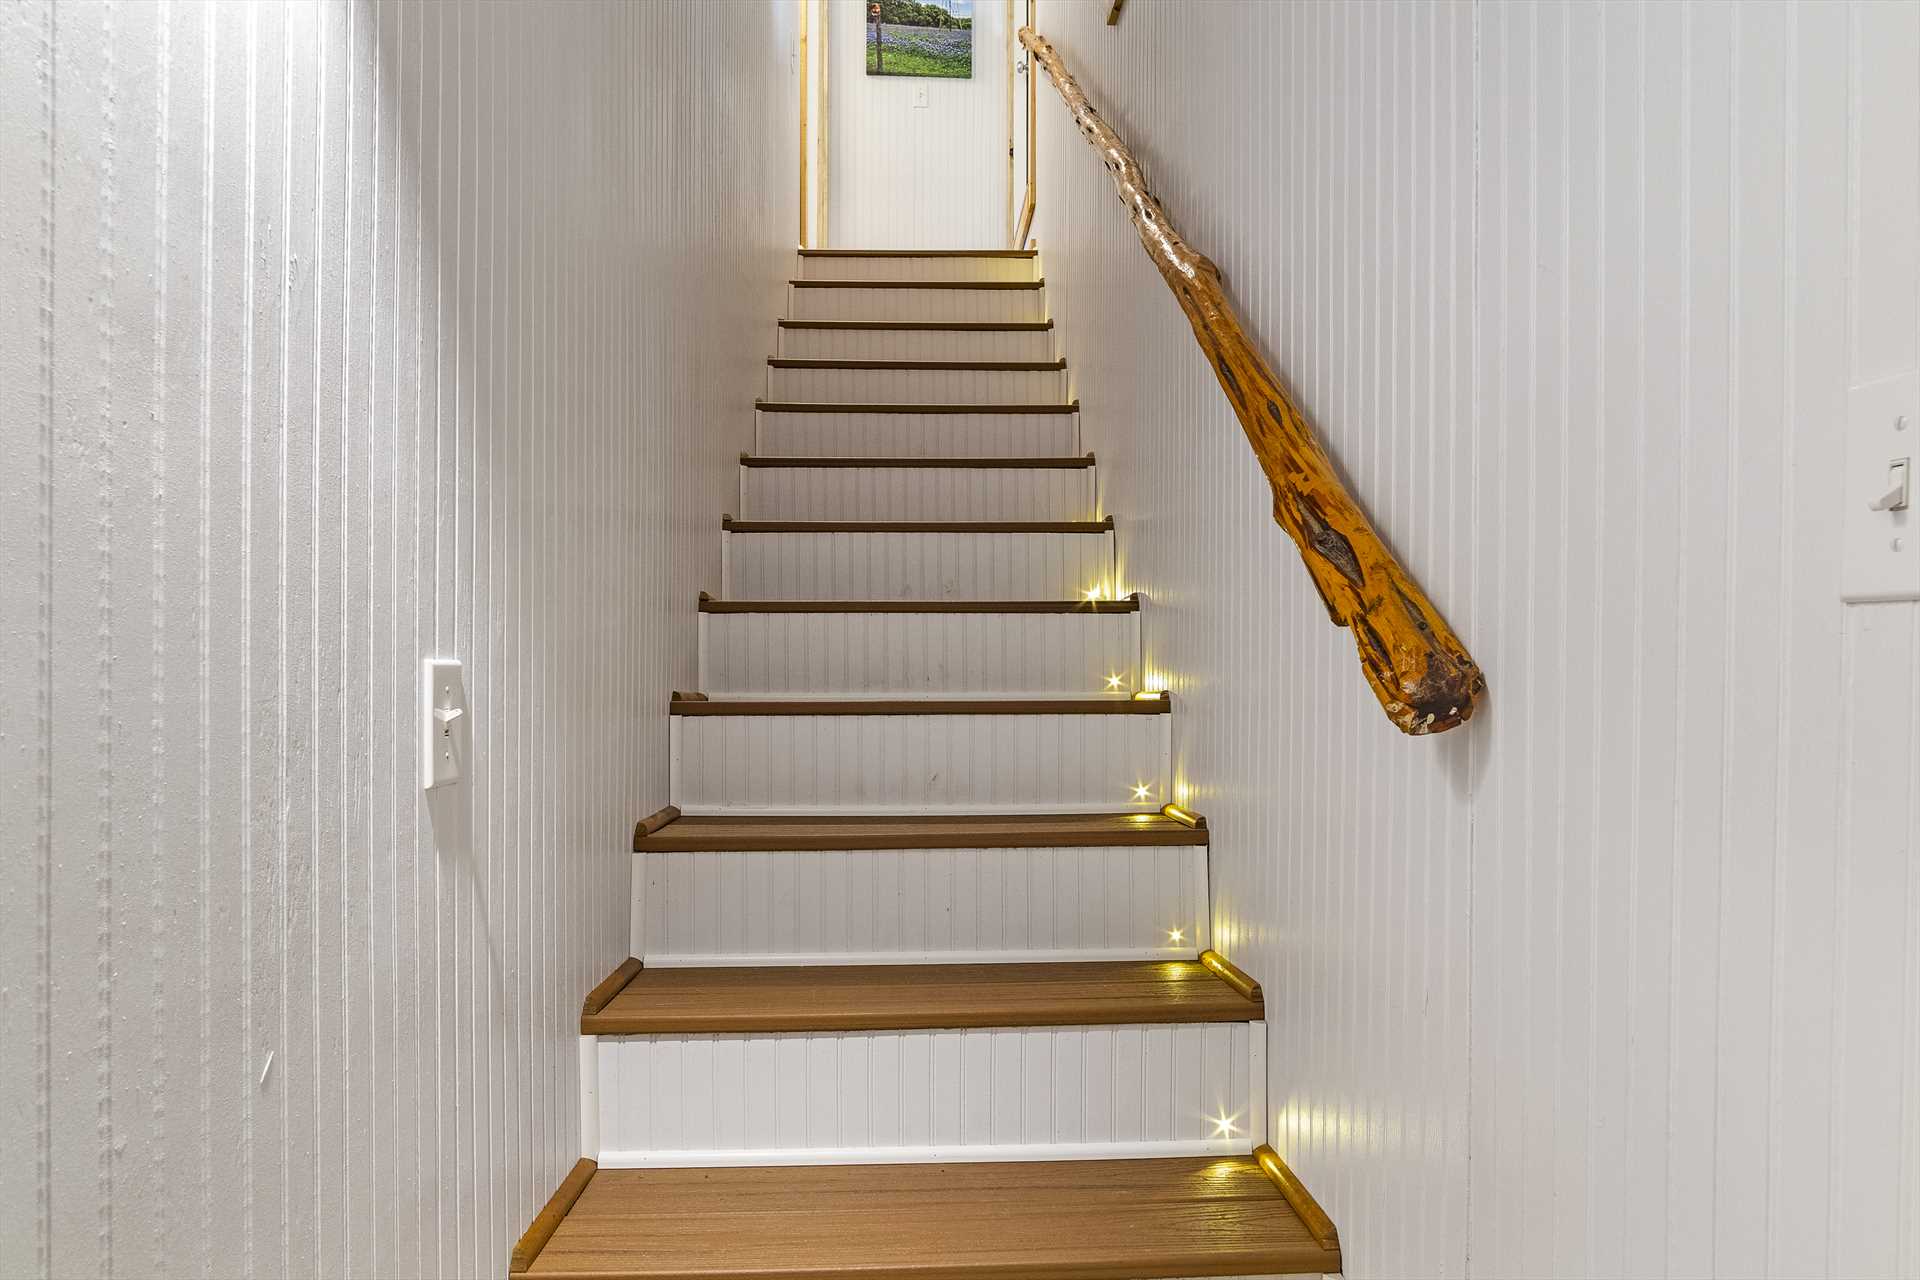                                                 Our guests love the decorative touches here! Check out the rustic banister and helpful stair lights as you head upstairs.